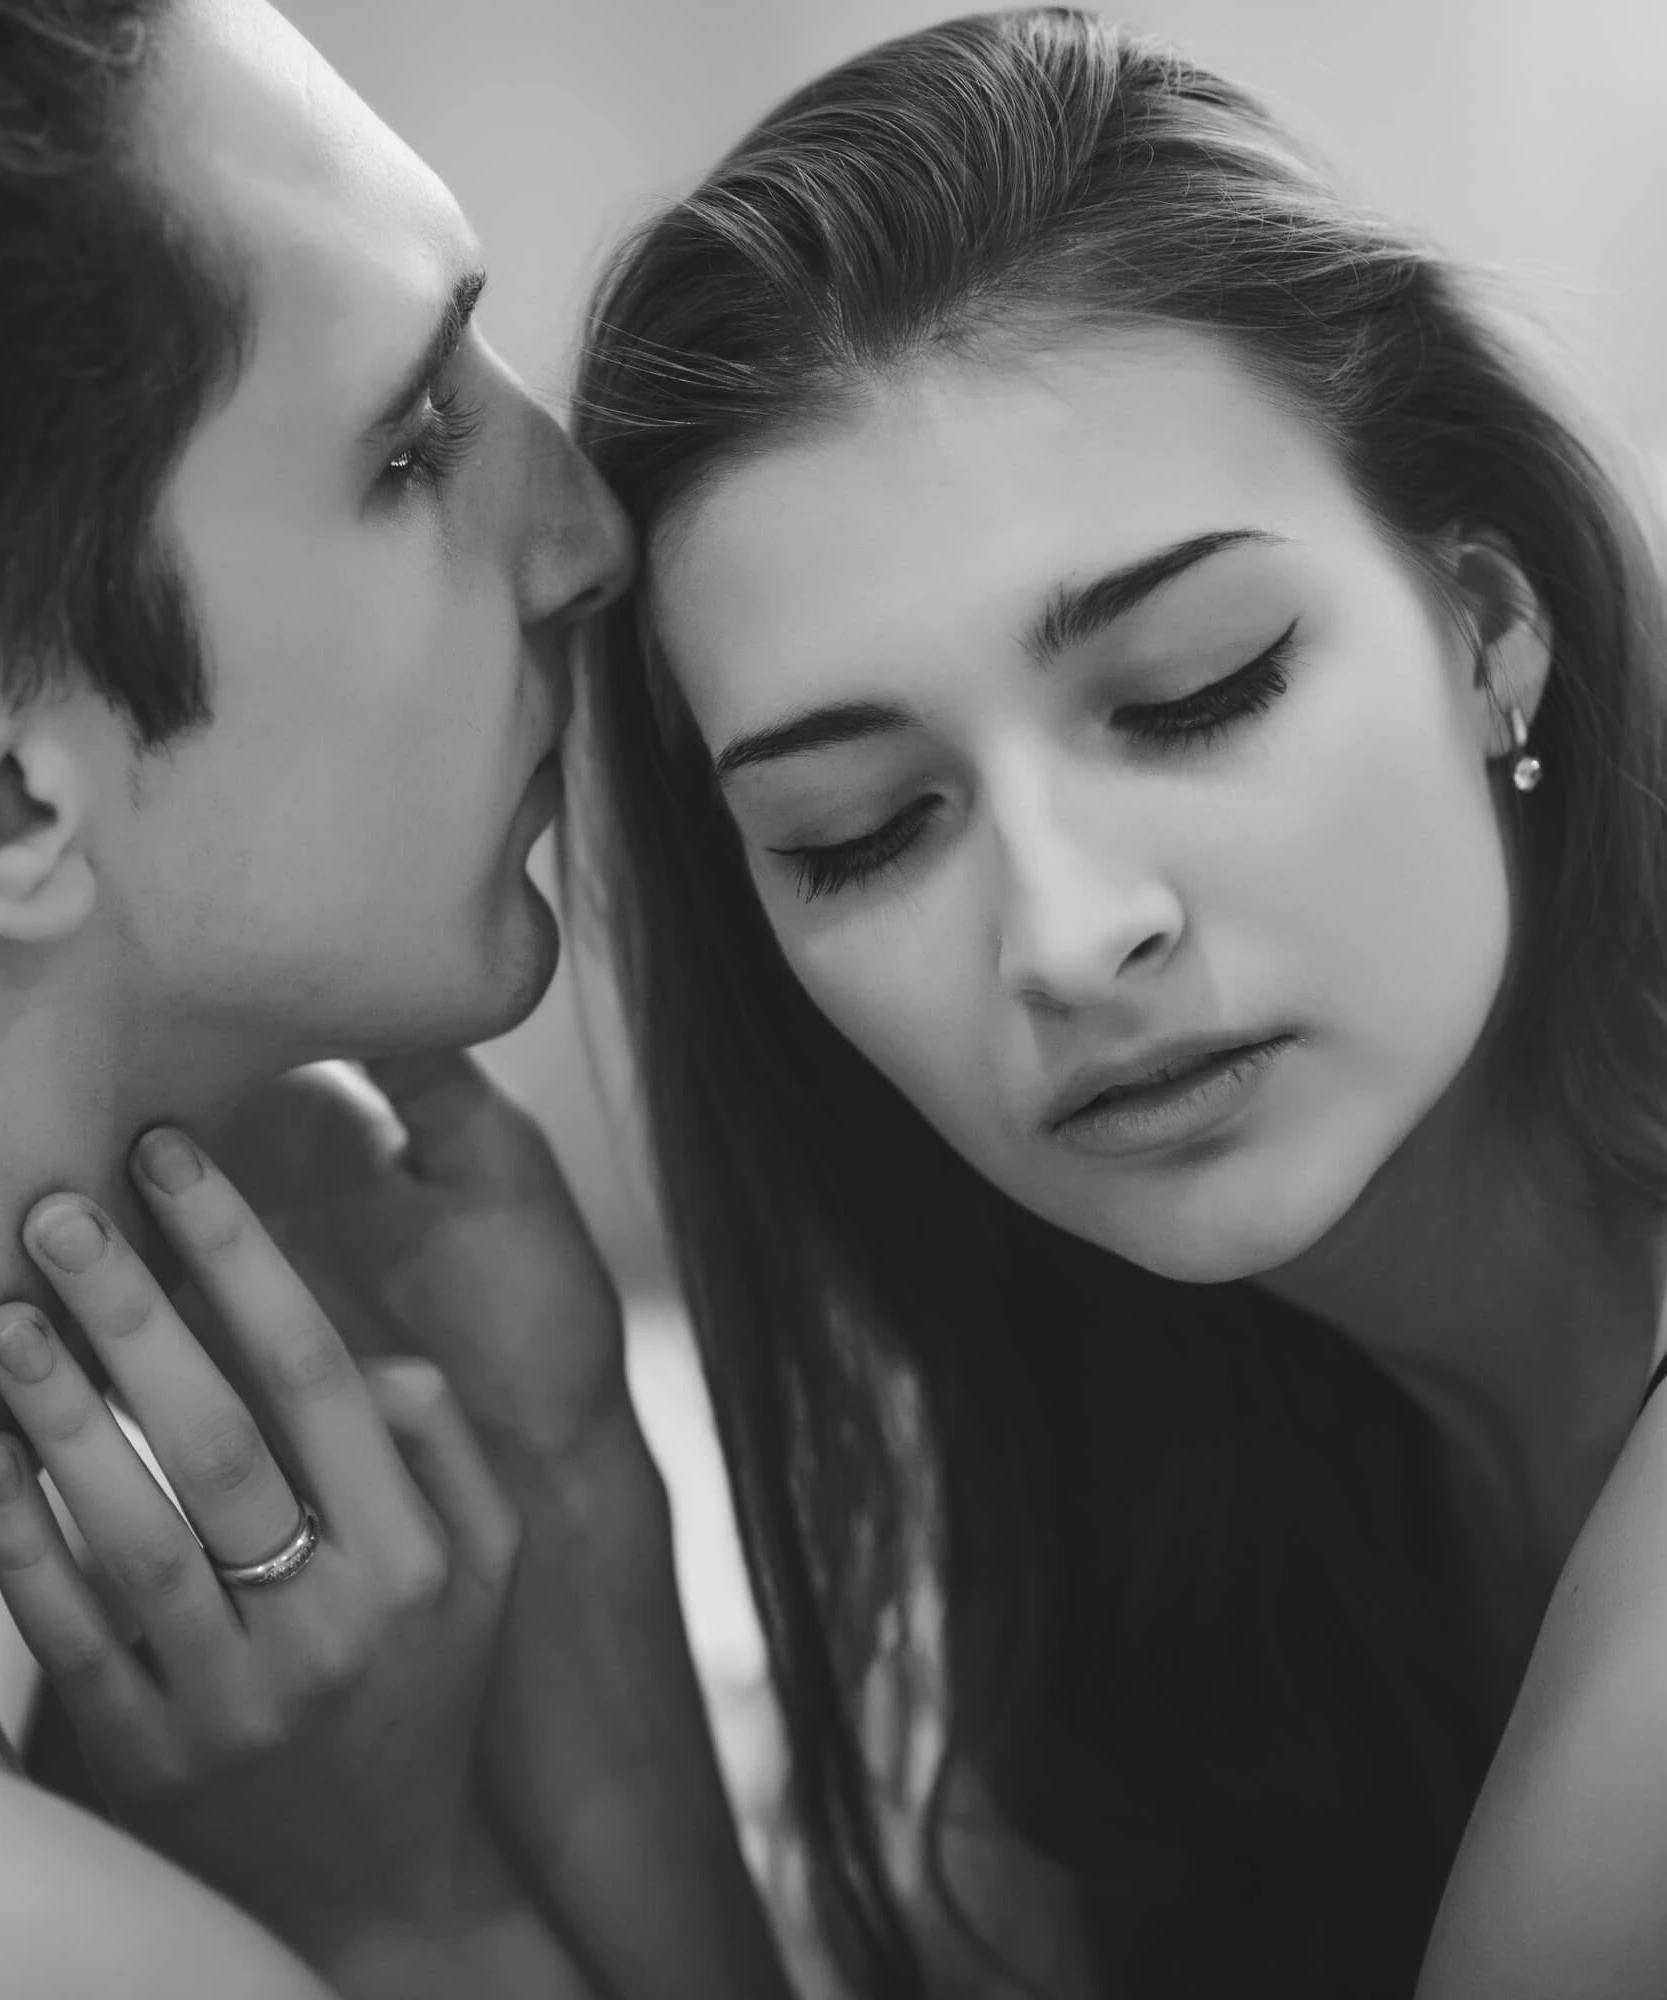 Let's Stop Romanticizing Trust Issues In Relationships